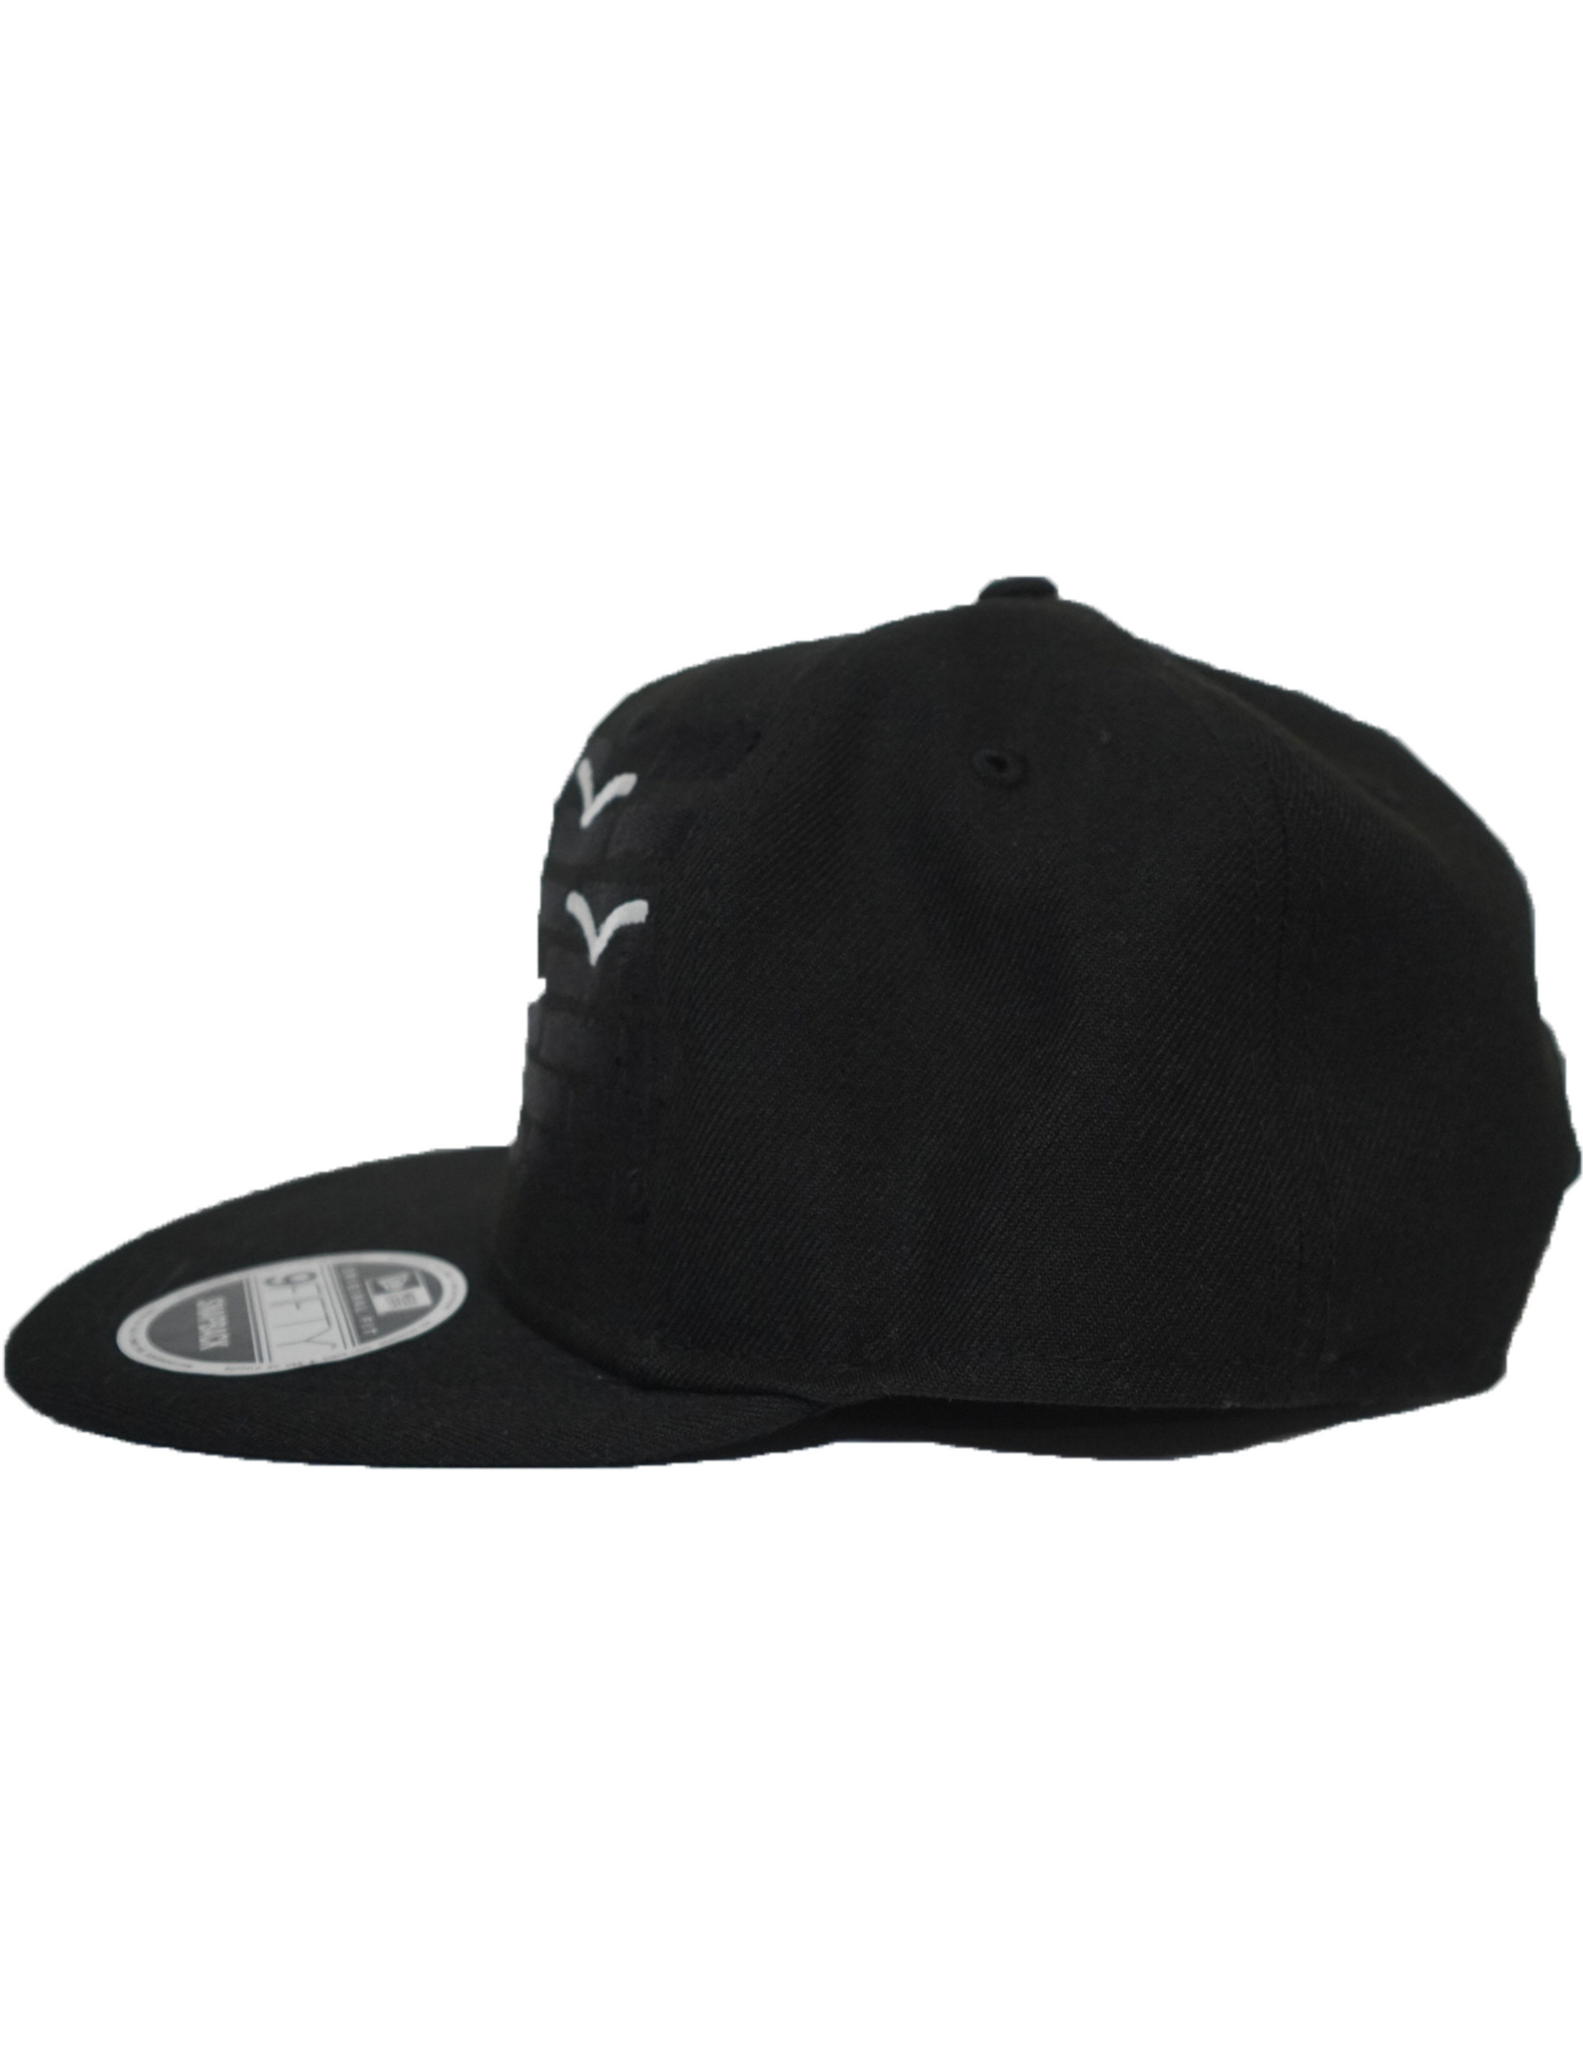 Flock Snapback DESIGNED BY THE STREETS